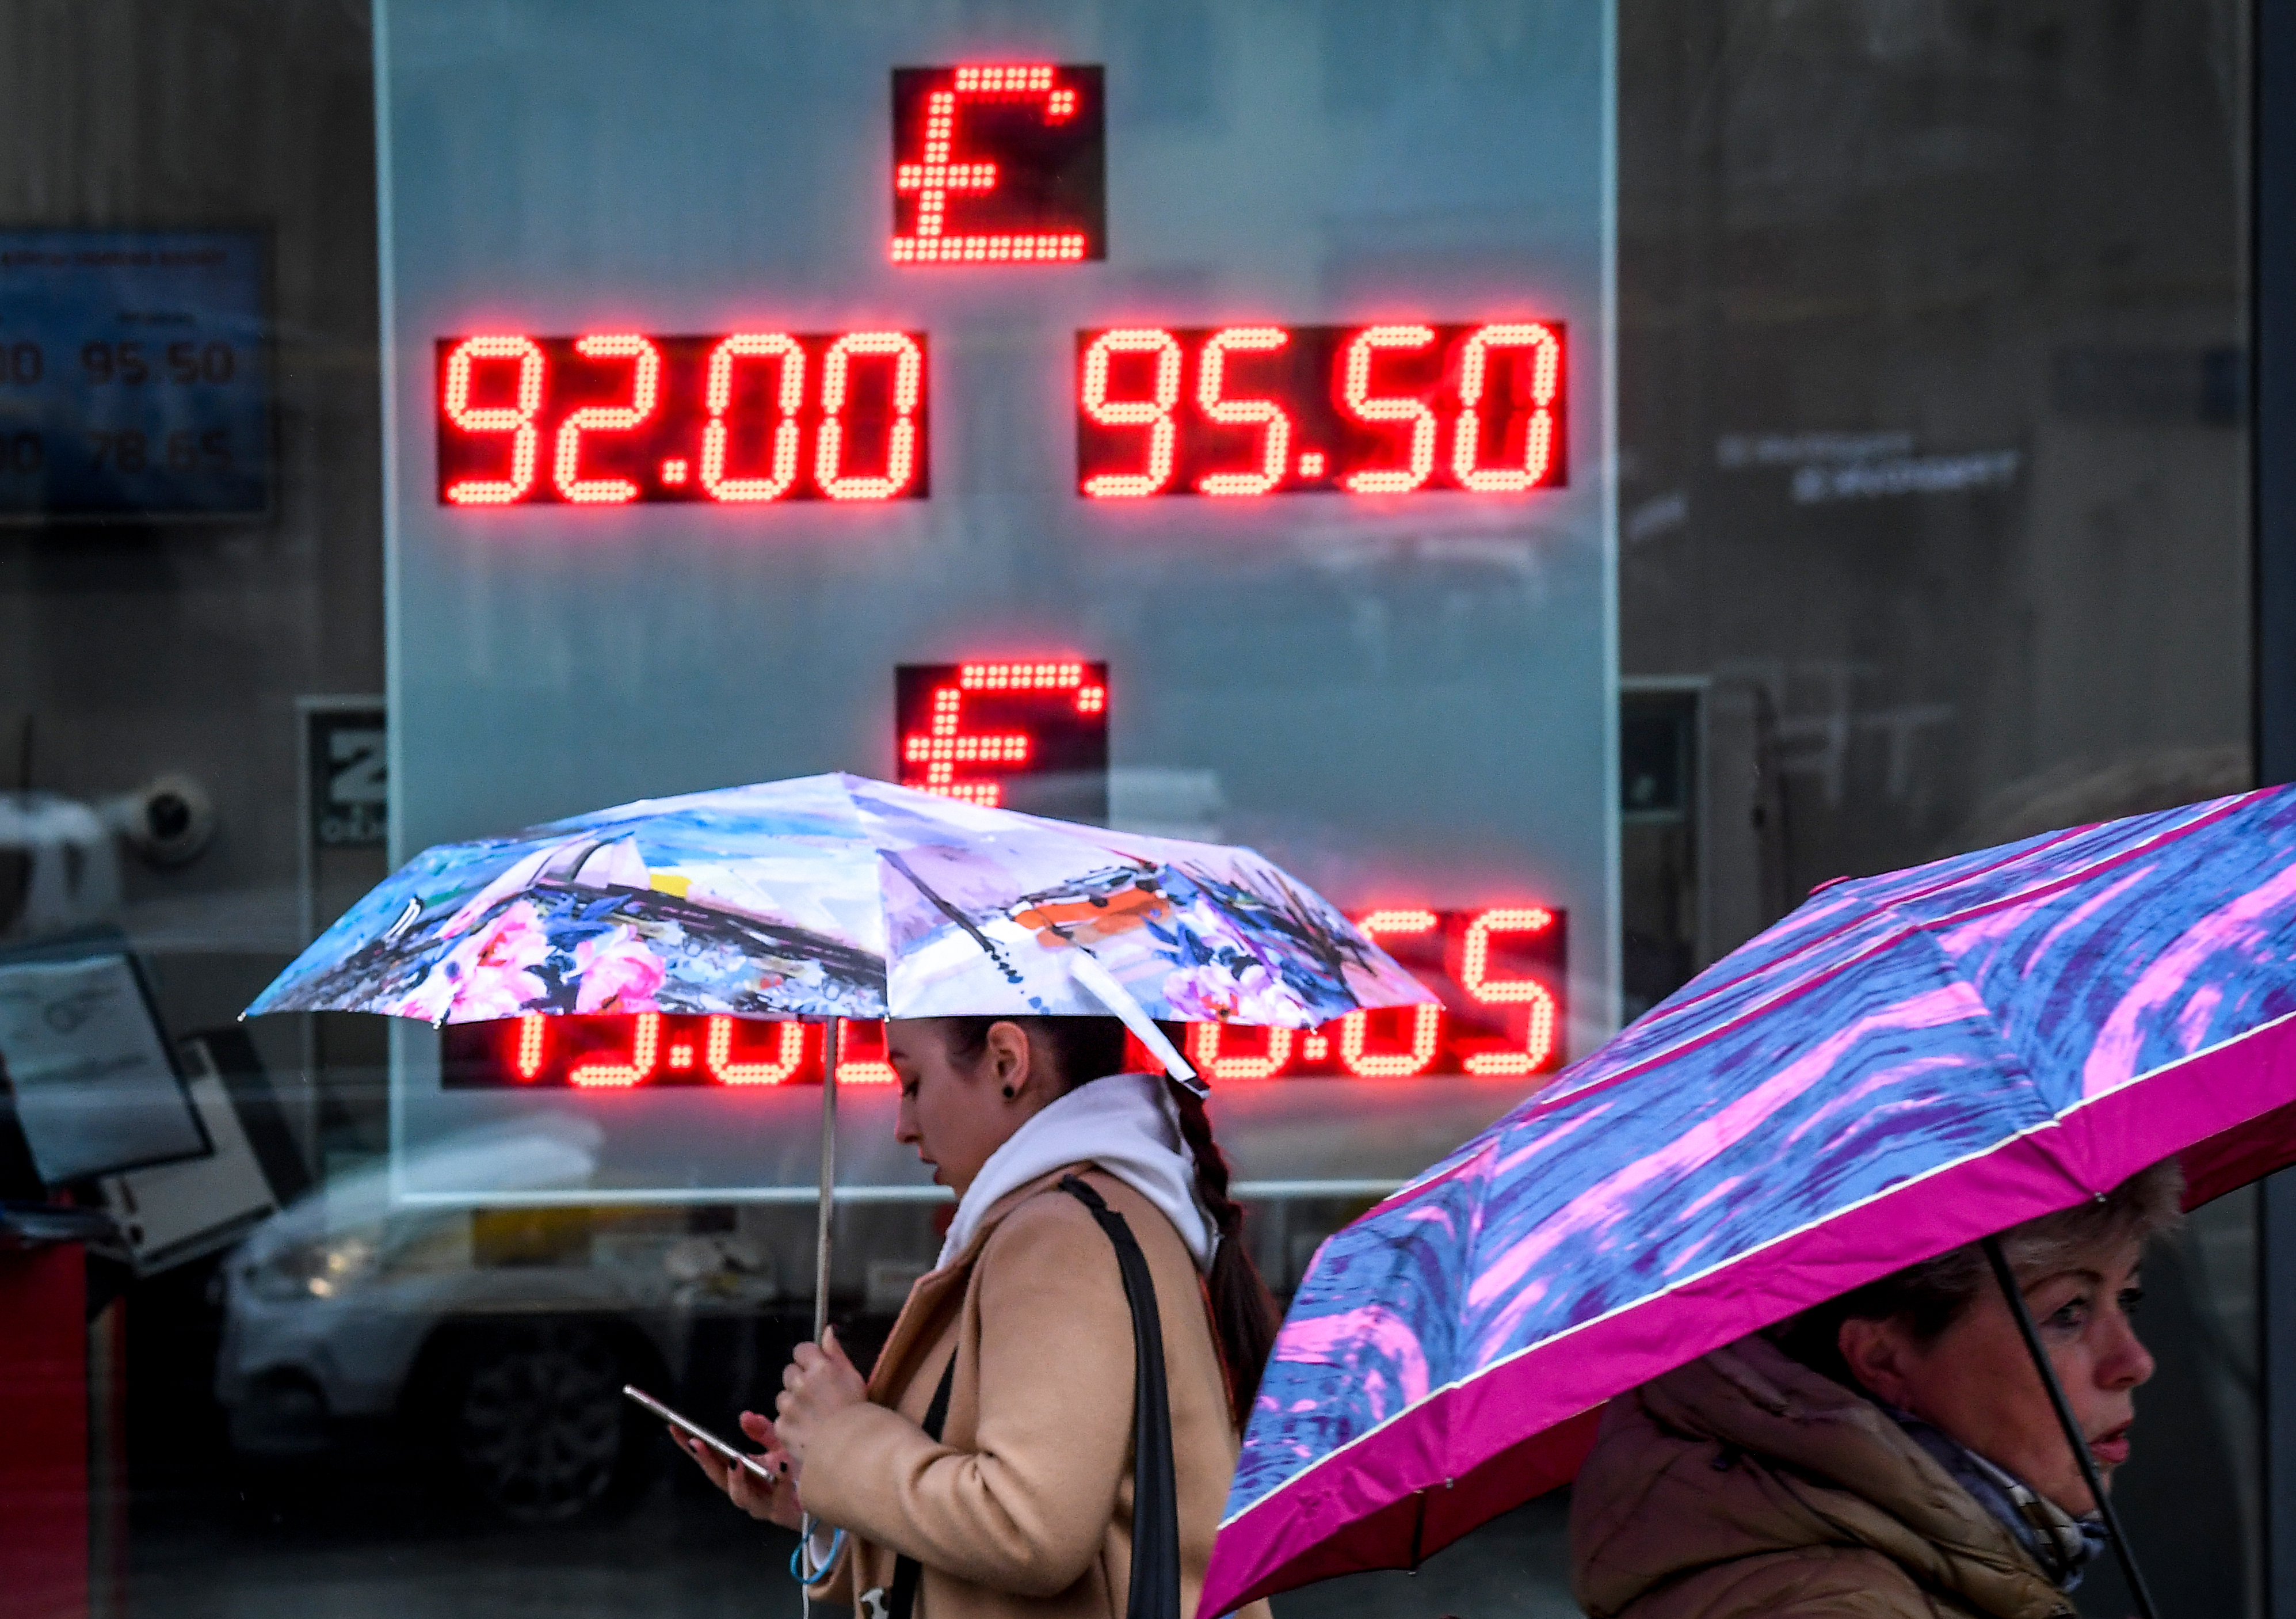 Women walk past a currency exchange office in Moscow on March 10, 2020. - Russia's RTS stock index dived more than 10 percent on opening March 10 after a public holiday, following a crash in oil prices that saw the ruble and global markets post massive losses. The Russian ruble tumbled in value March 9 to trade at 75 to the US dollar, a rate last seen in early 2016. On March 10, it rose slightly and was trading at around 72 to the dollar and 82 to the euro. (Photo by Yuri KADOBNOV / AFP)